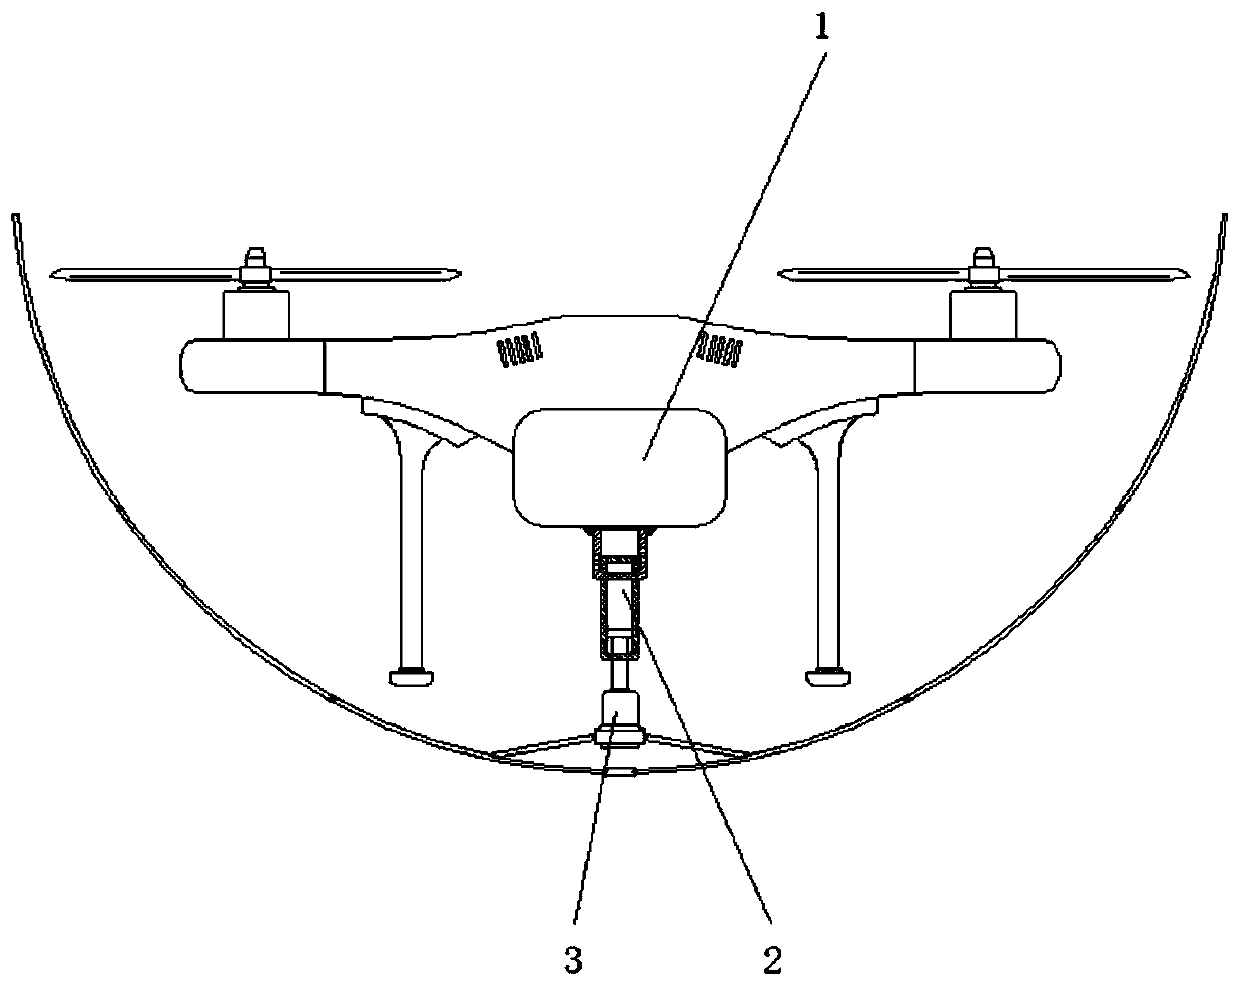 Unmanned aerial vehicle protection mechanism for preventing crash in the case of signal loss